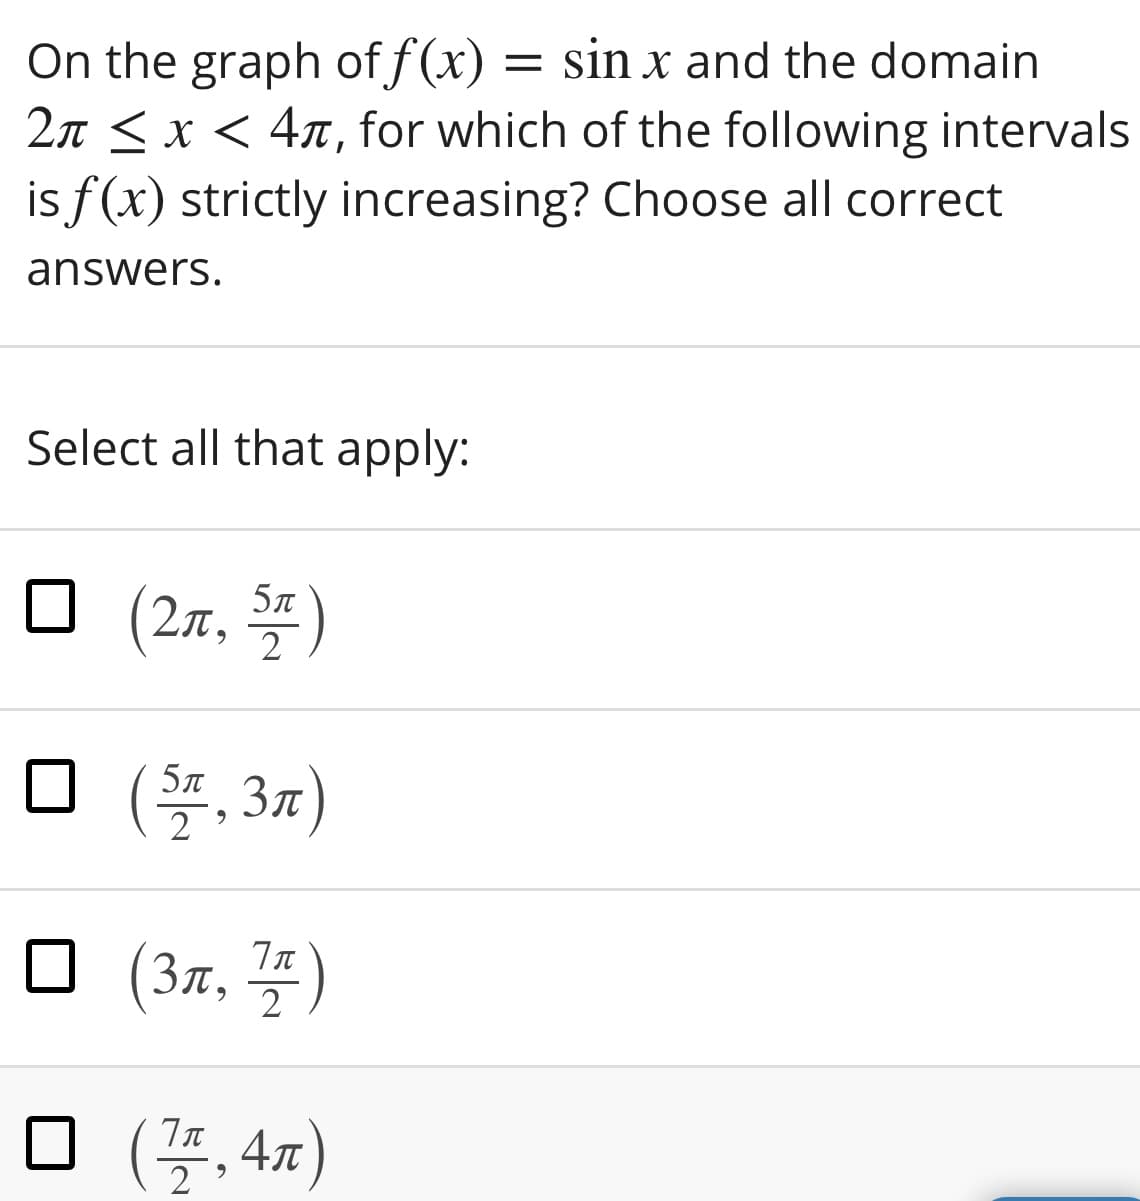 On the graph of f(x) = sin x and the domain
2n < x < 4x, for which of the following intervals
is f(x) strictly increasing? Choose all correct
answers.
Select all that apply:
□ (2r, 꽃)
5л
O (, 37)
5л
2
□ (3x, 플)
2
□ (플,4m)
